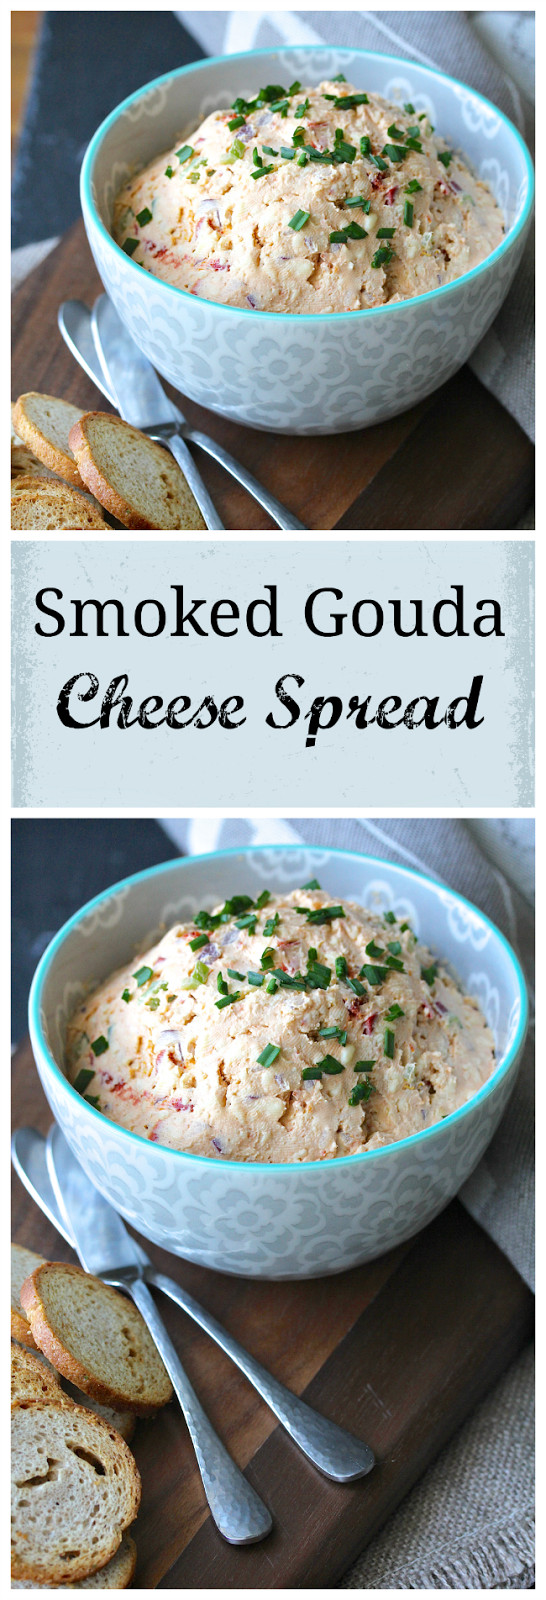 Gouda Cheese Appetizers
 Smoked Gouda Cheese Spread